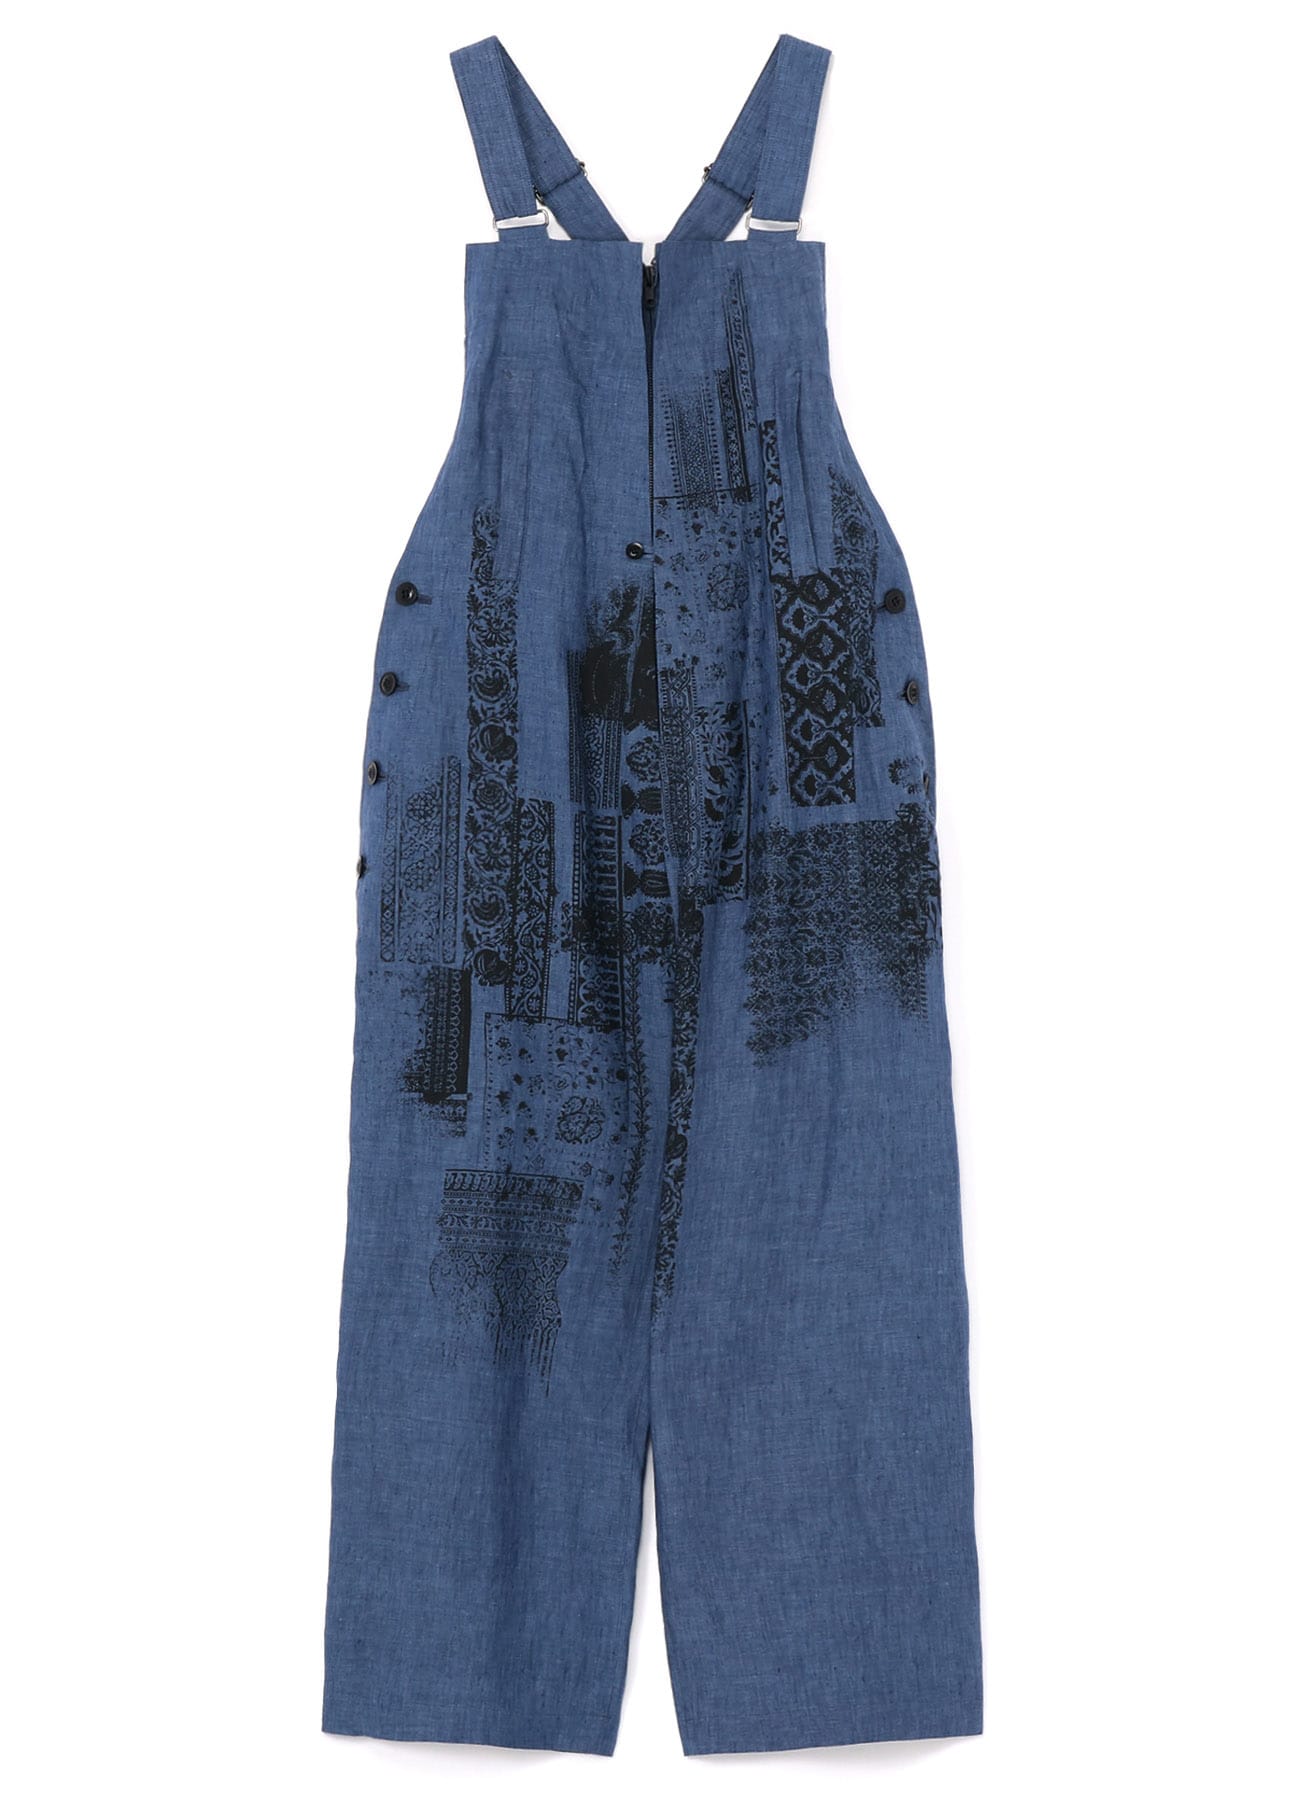 LINEN CHAMBRAY ETHNIC PATCHWORK PRINT OVERALLS(XS Light Blue): Y's 